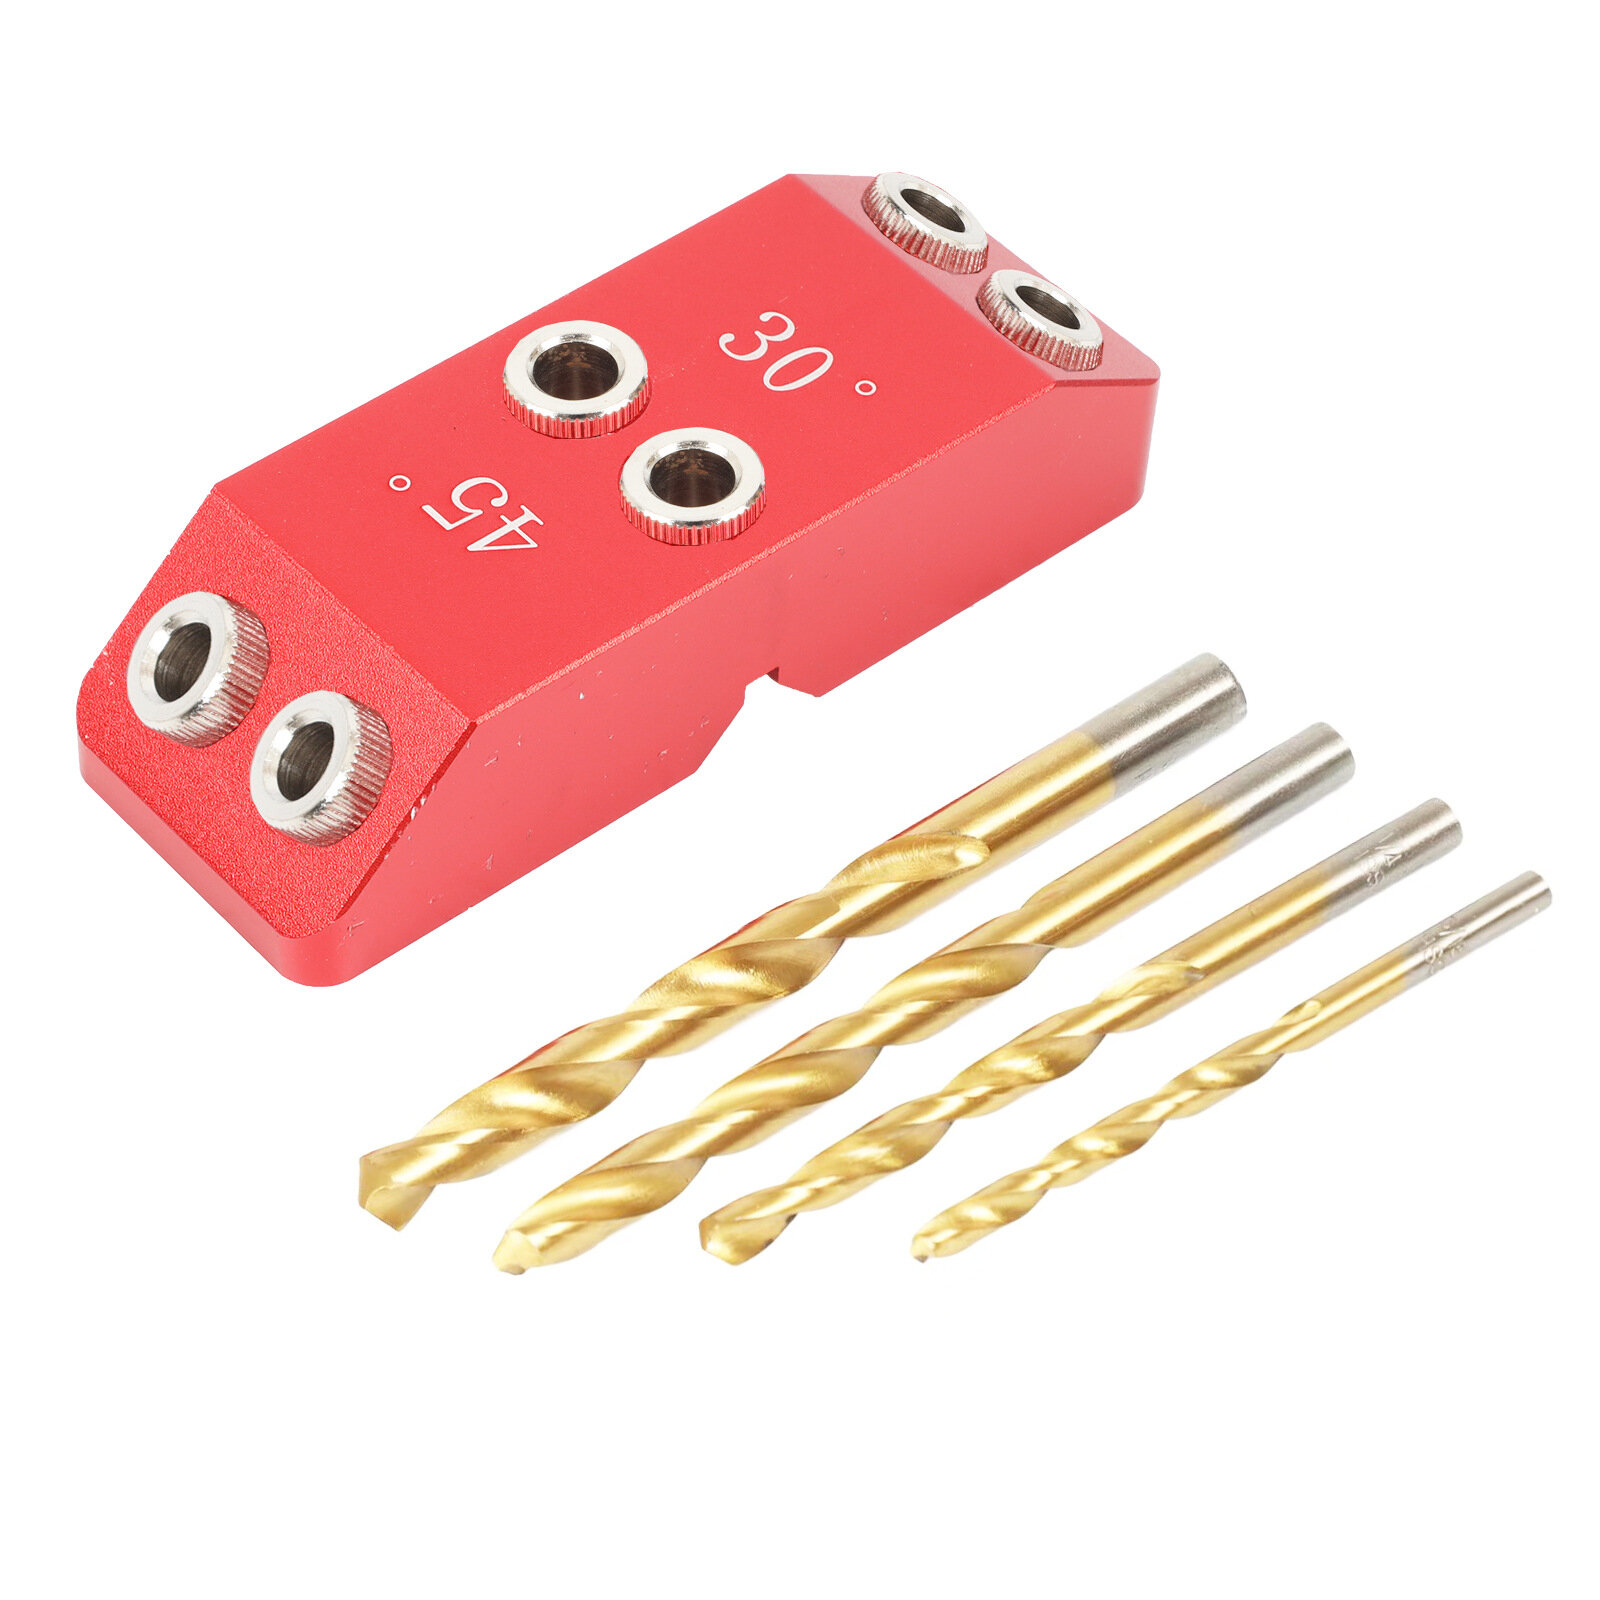 Aluminum Alloy Pocket Hole Jig 30 45 90 Degree Angle 4 Sizes Drill Jig Dowel Hole Punch Locator Drill Guide for Woodwork